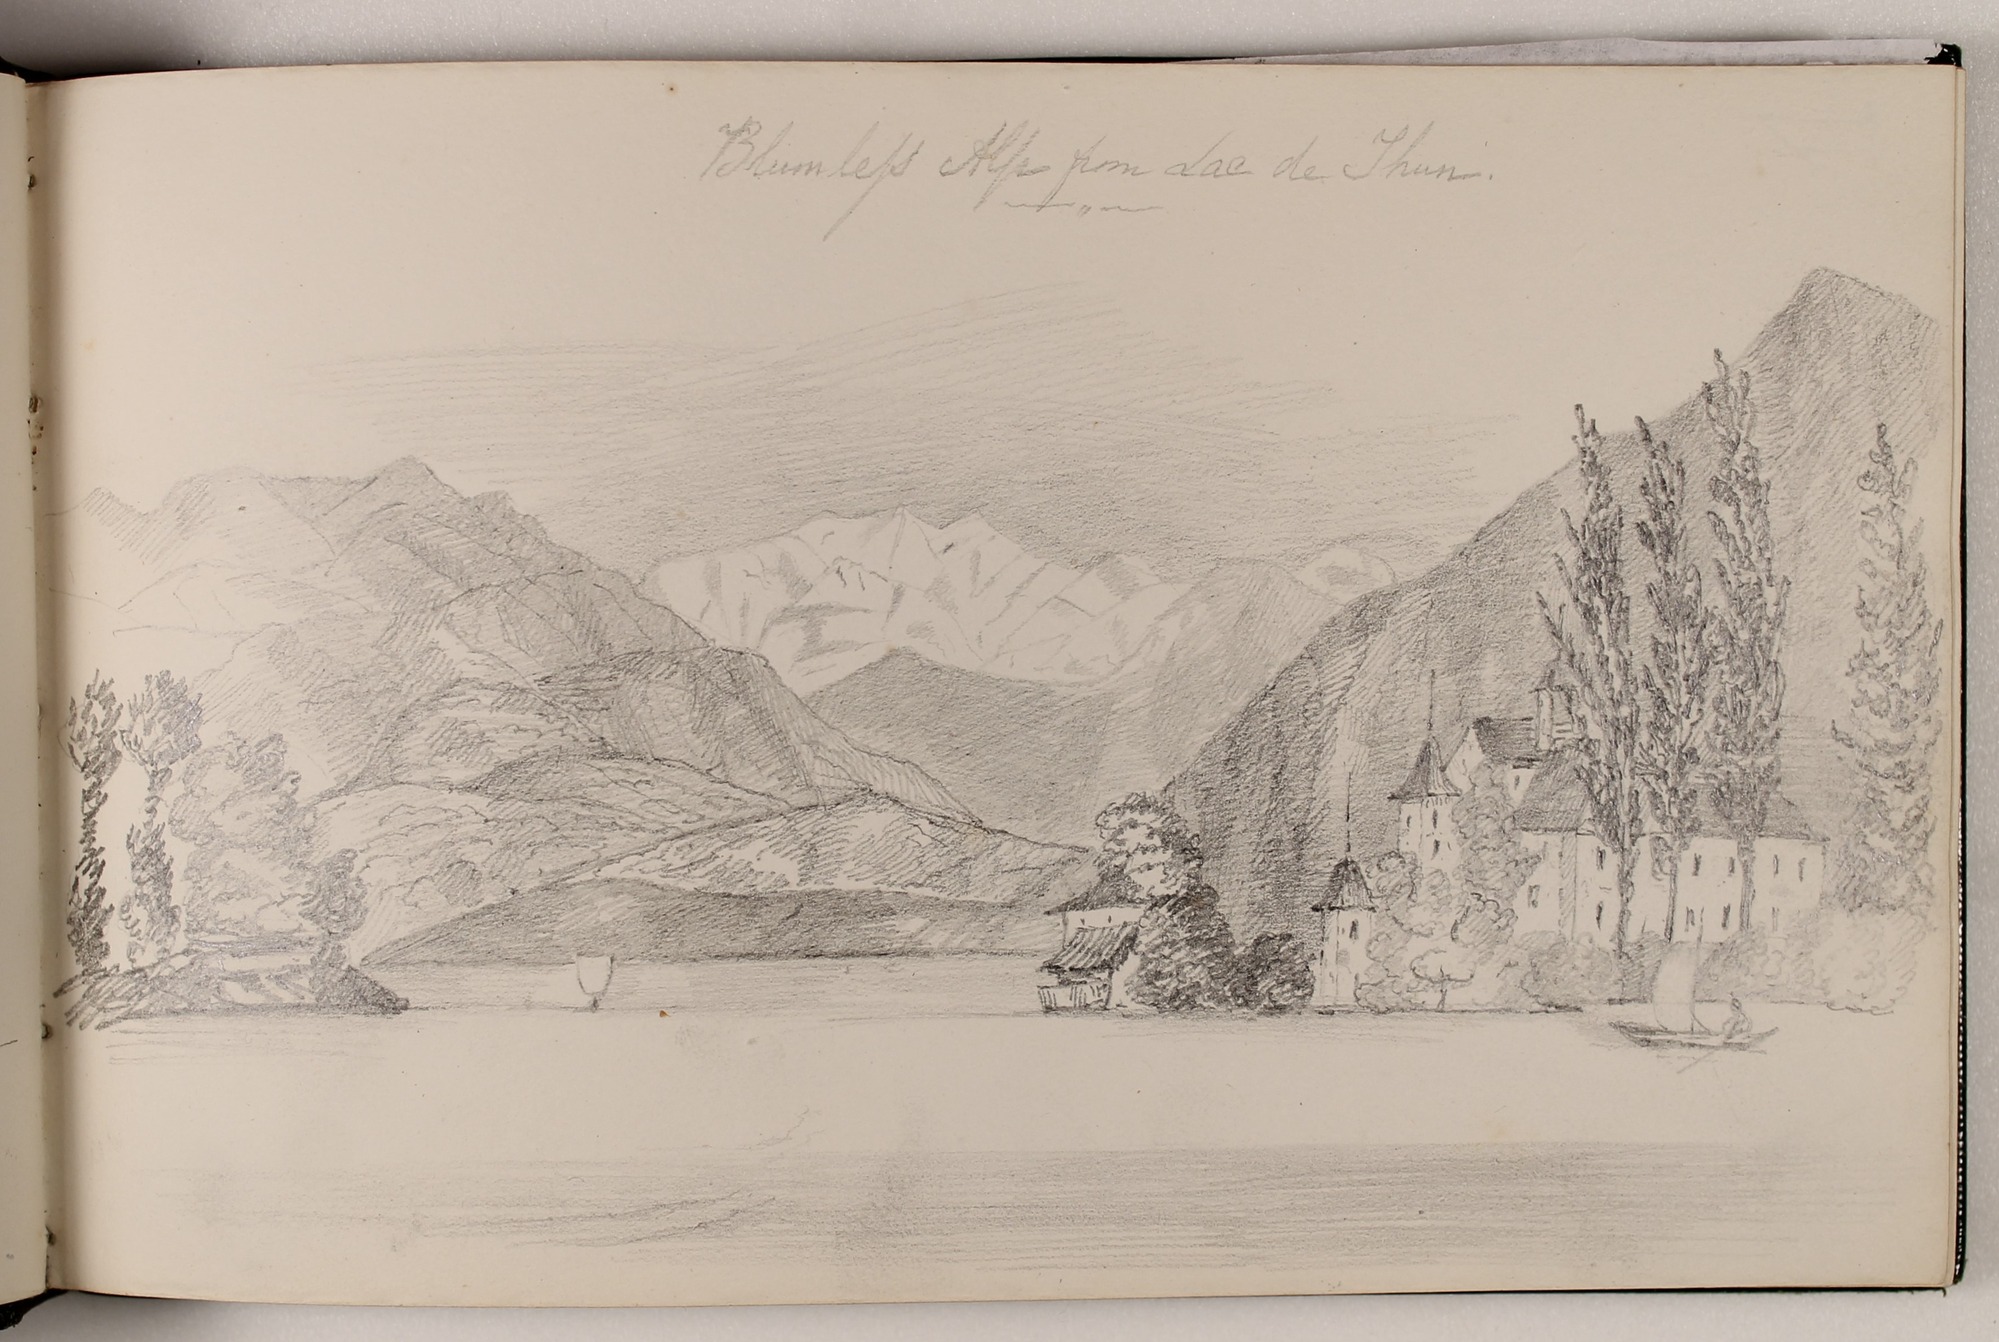 Pencil landscape in sketchbook of large mountains in distance with lake in foreground